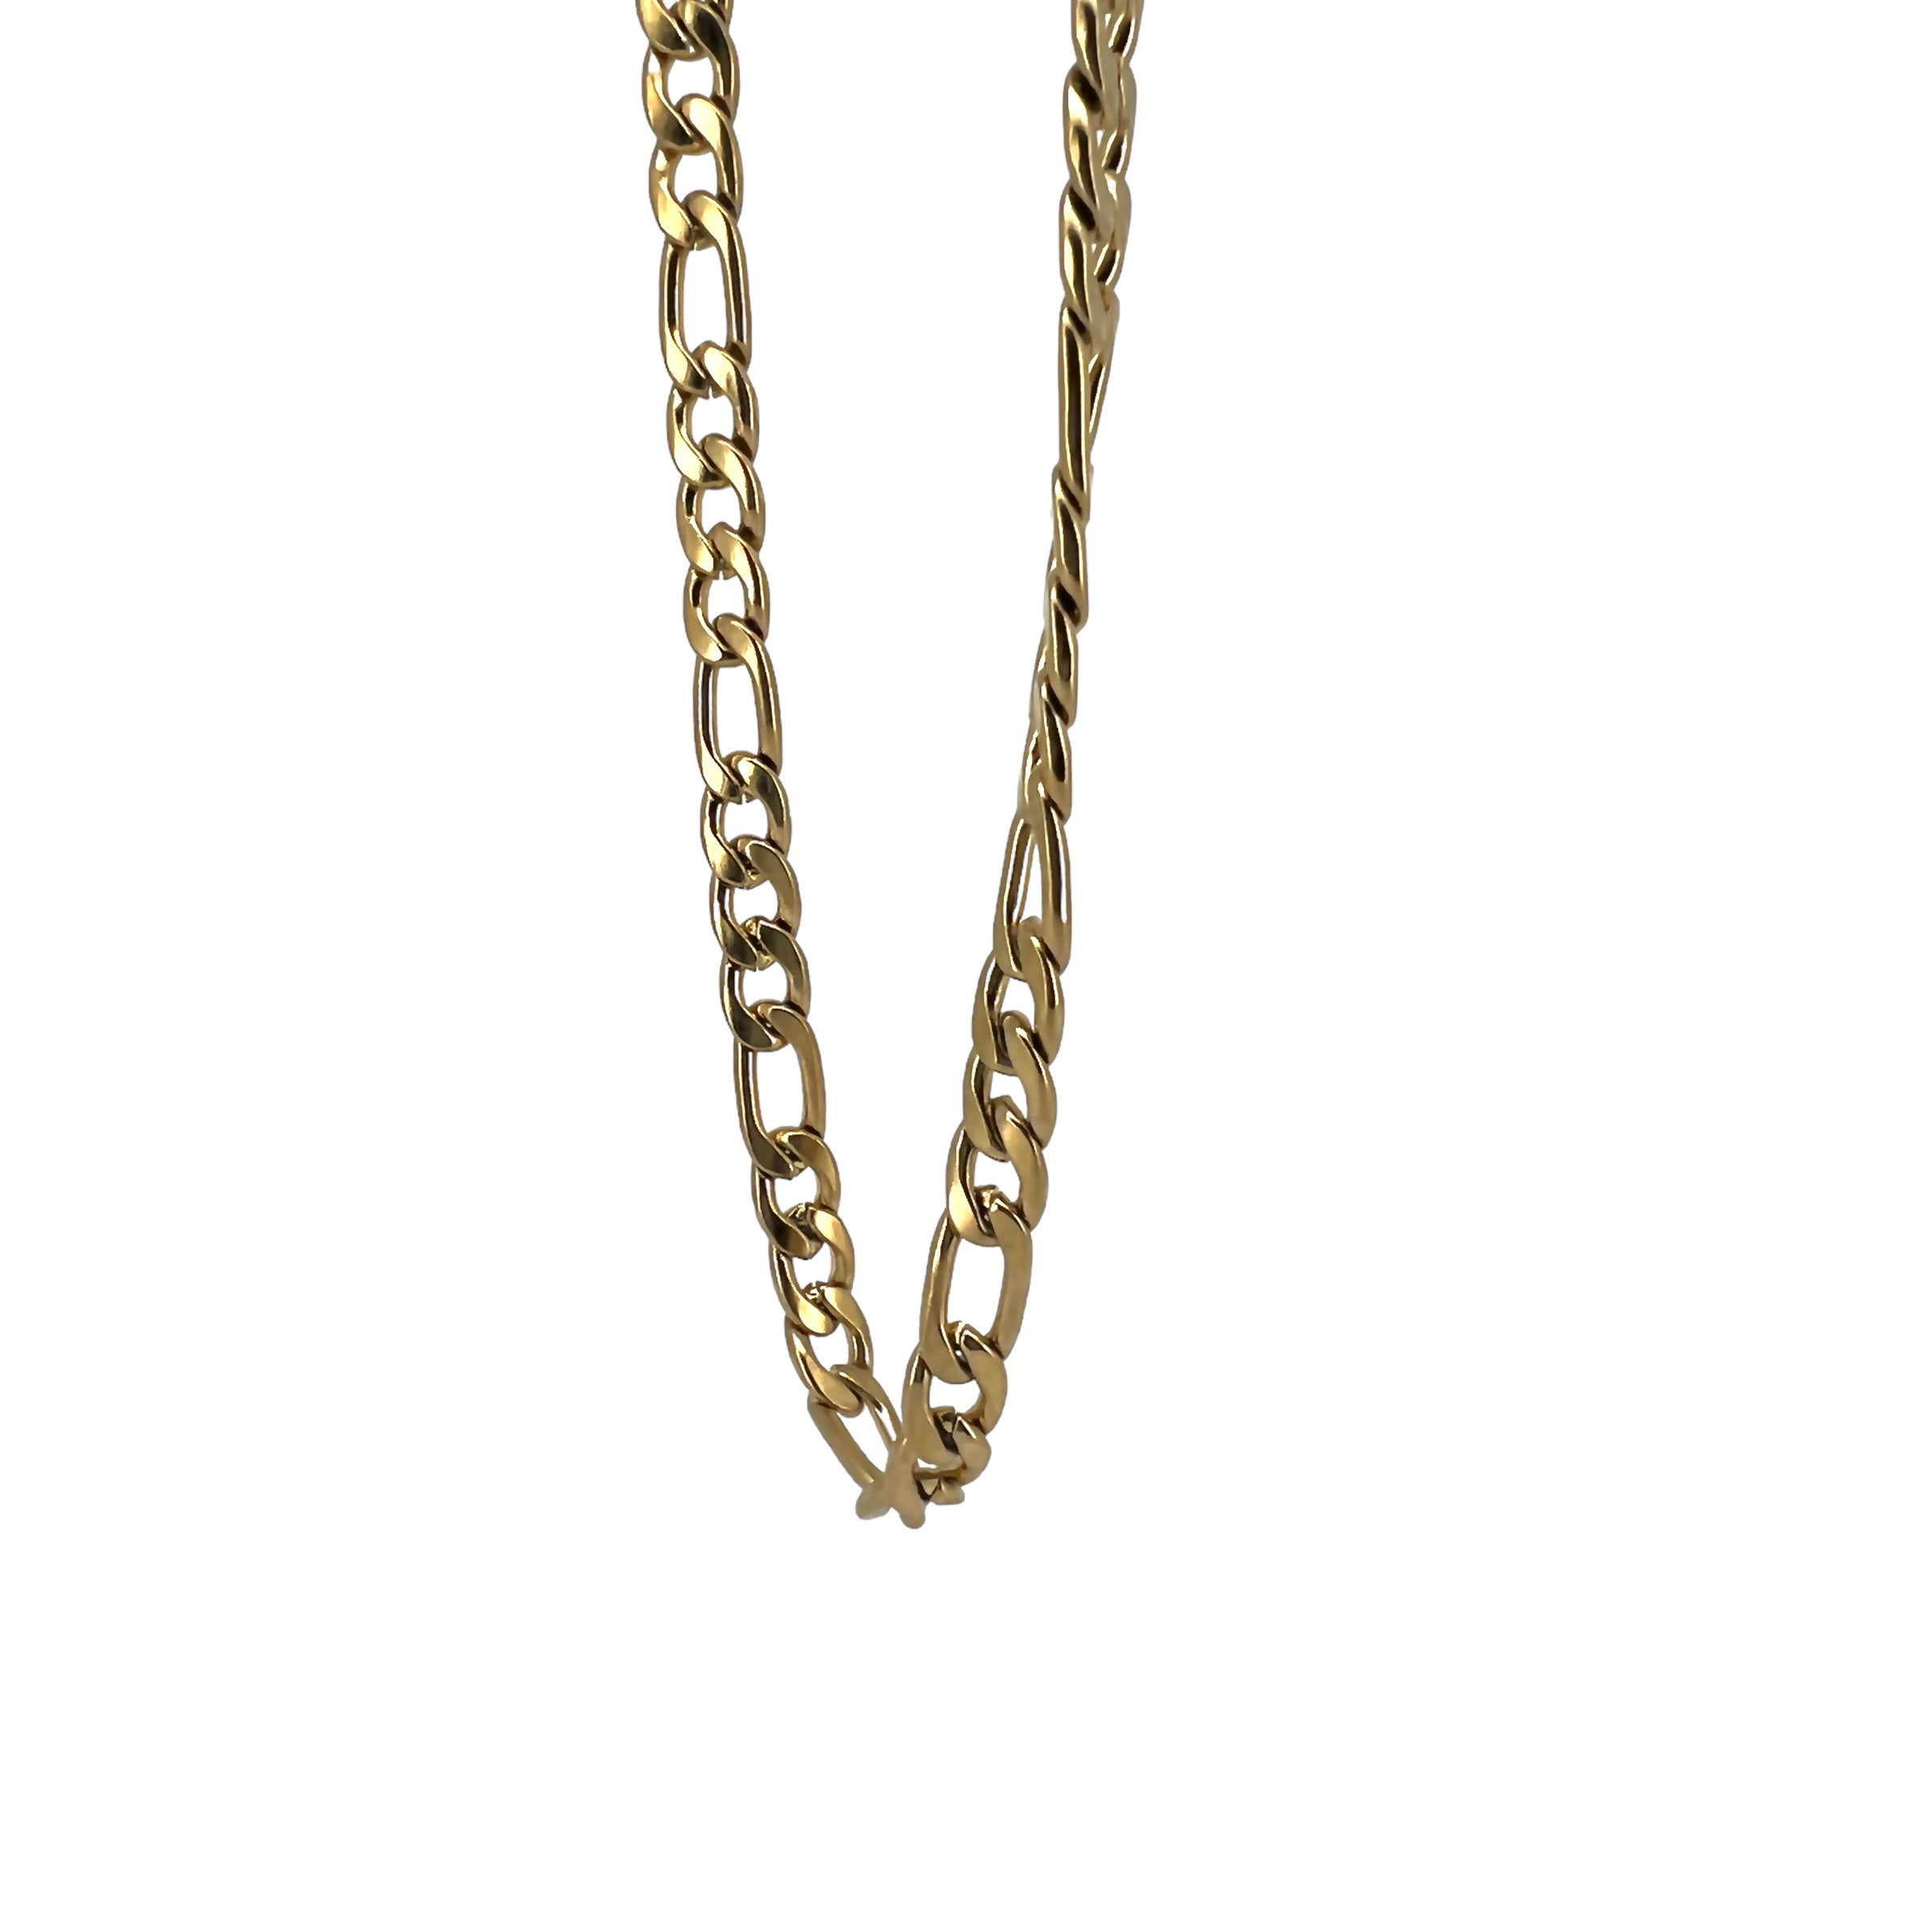 Beckham Stainless Steel Figaro Chain Necklace